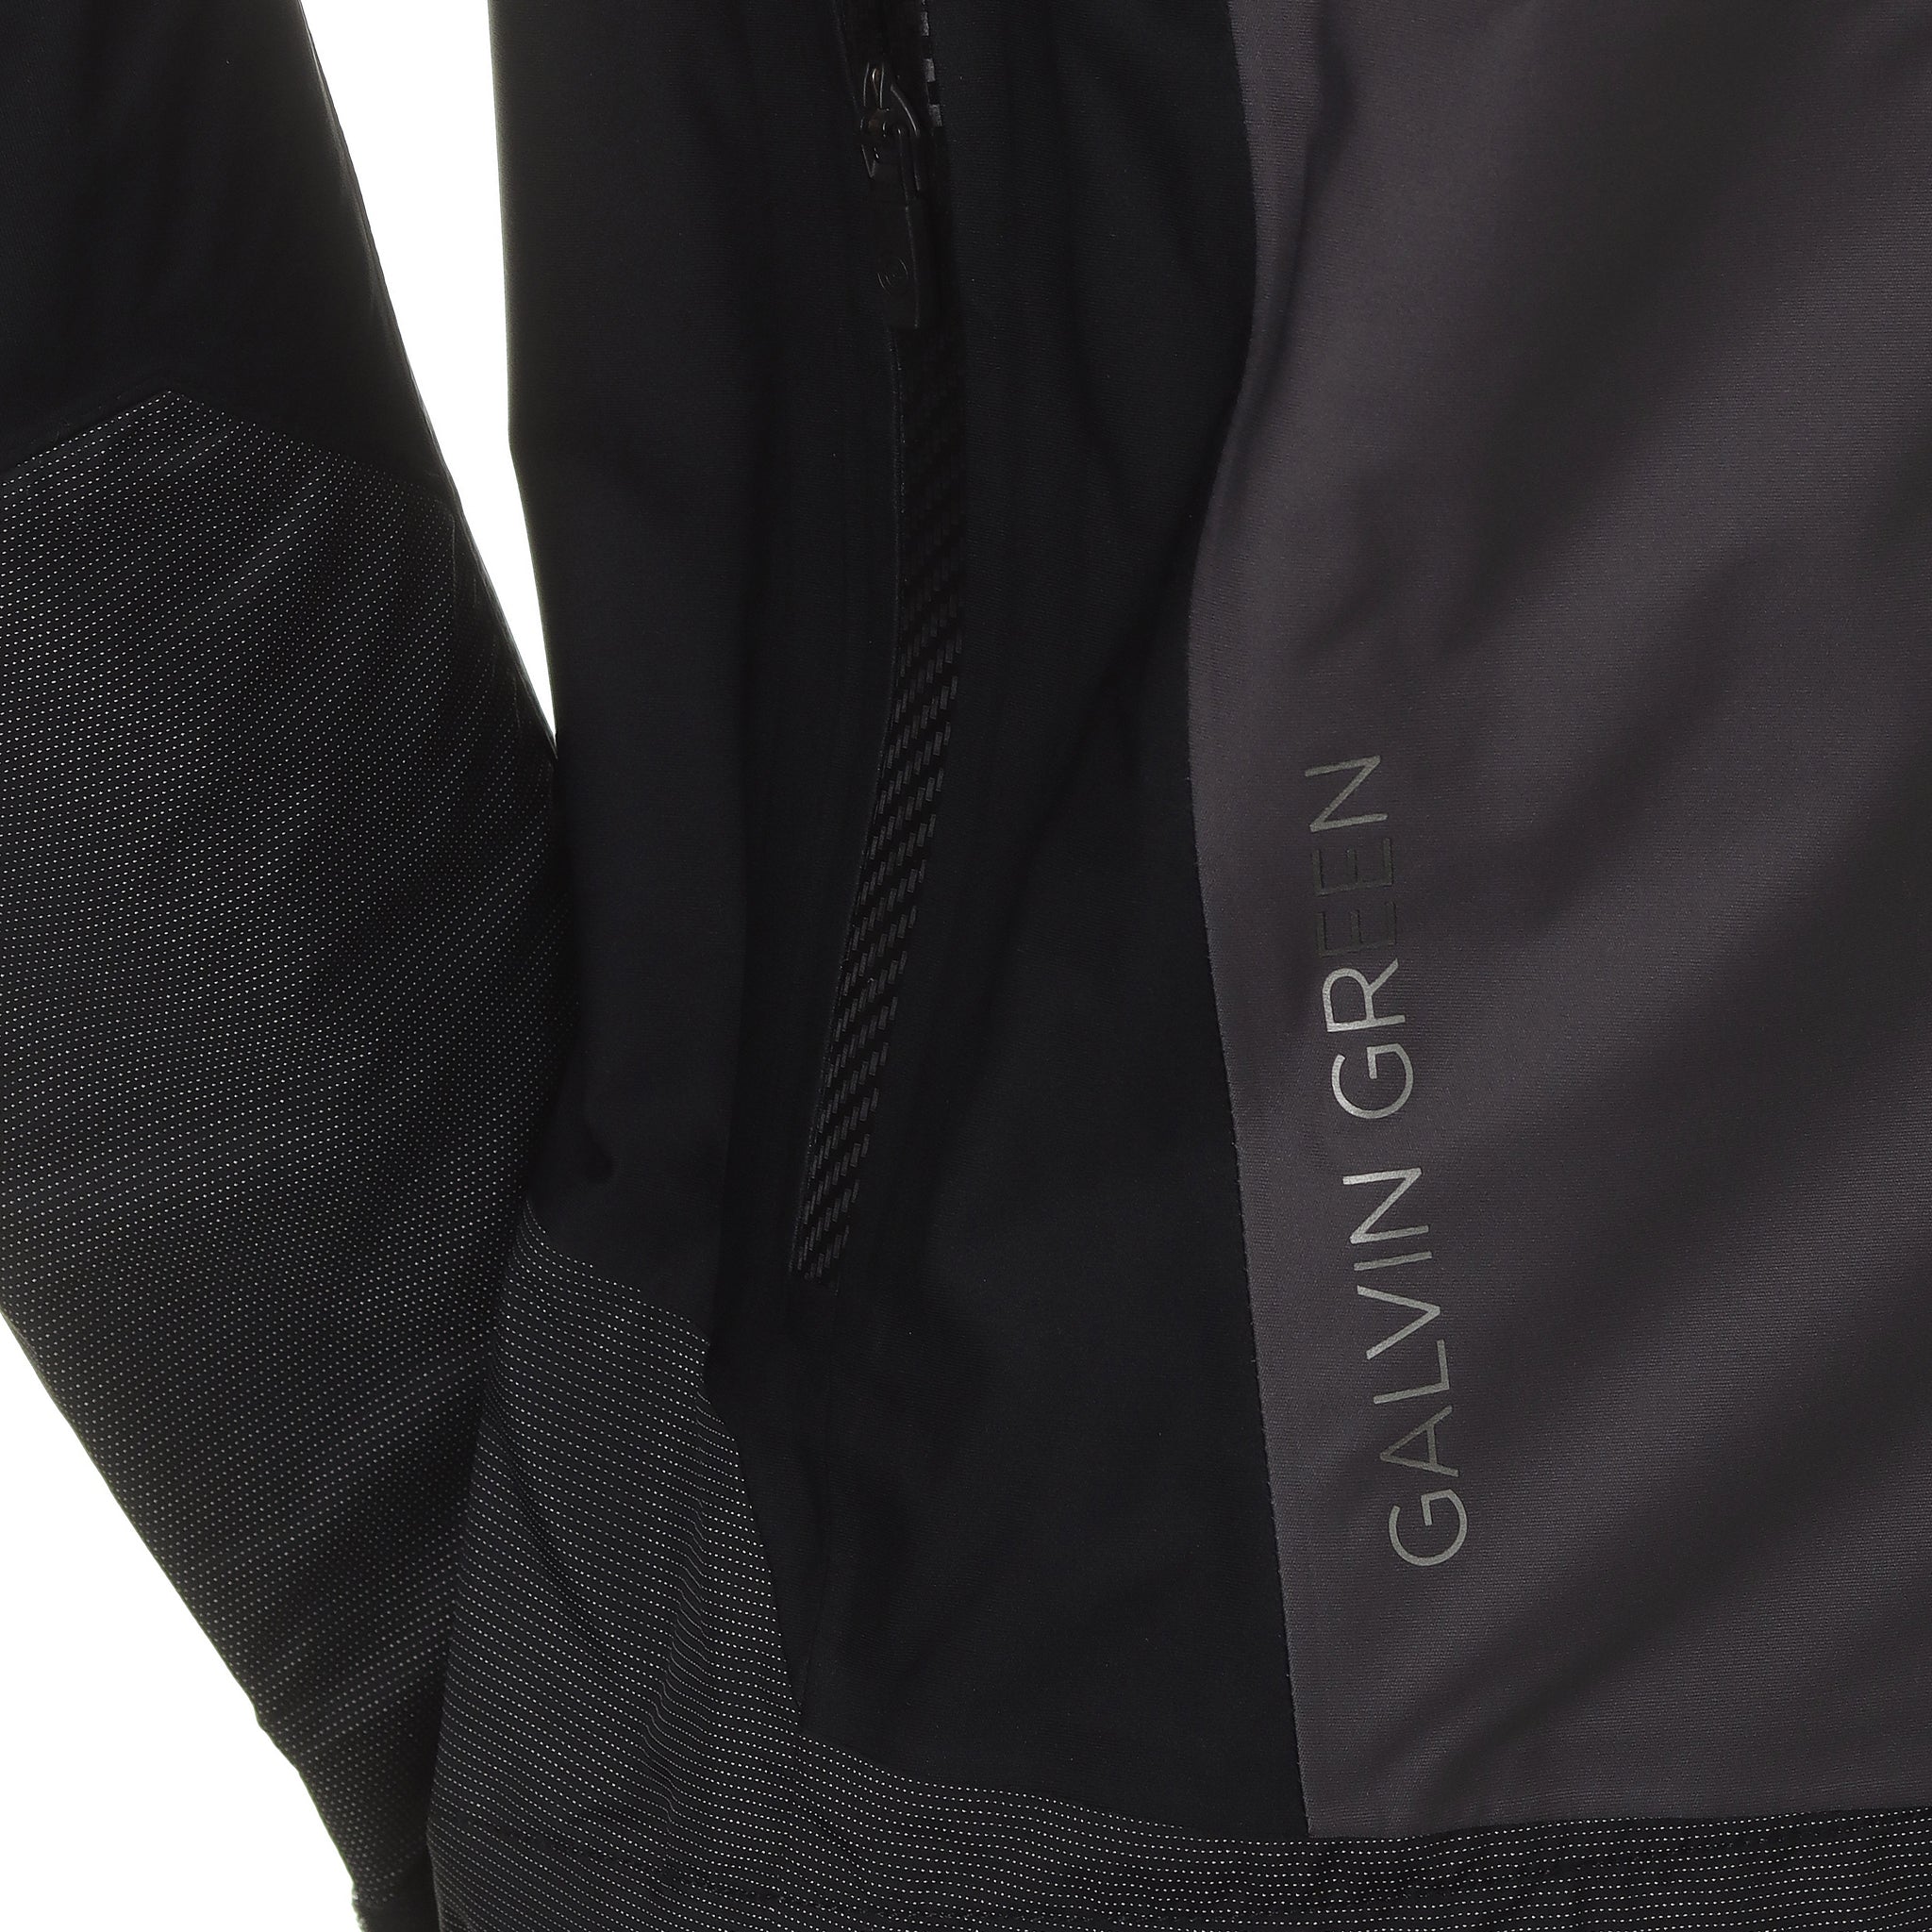 galvin-green-alister-c-knit-gore-tex-waterproof-jacket-g1302-77-forged-iron-black